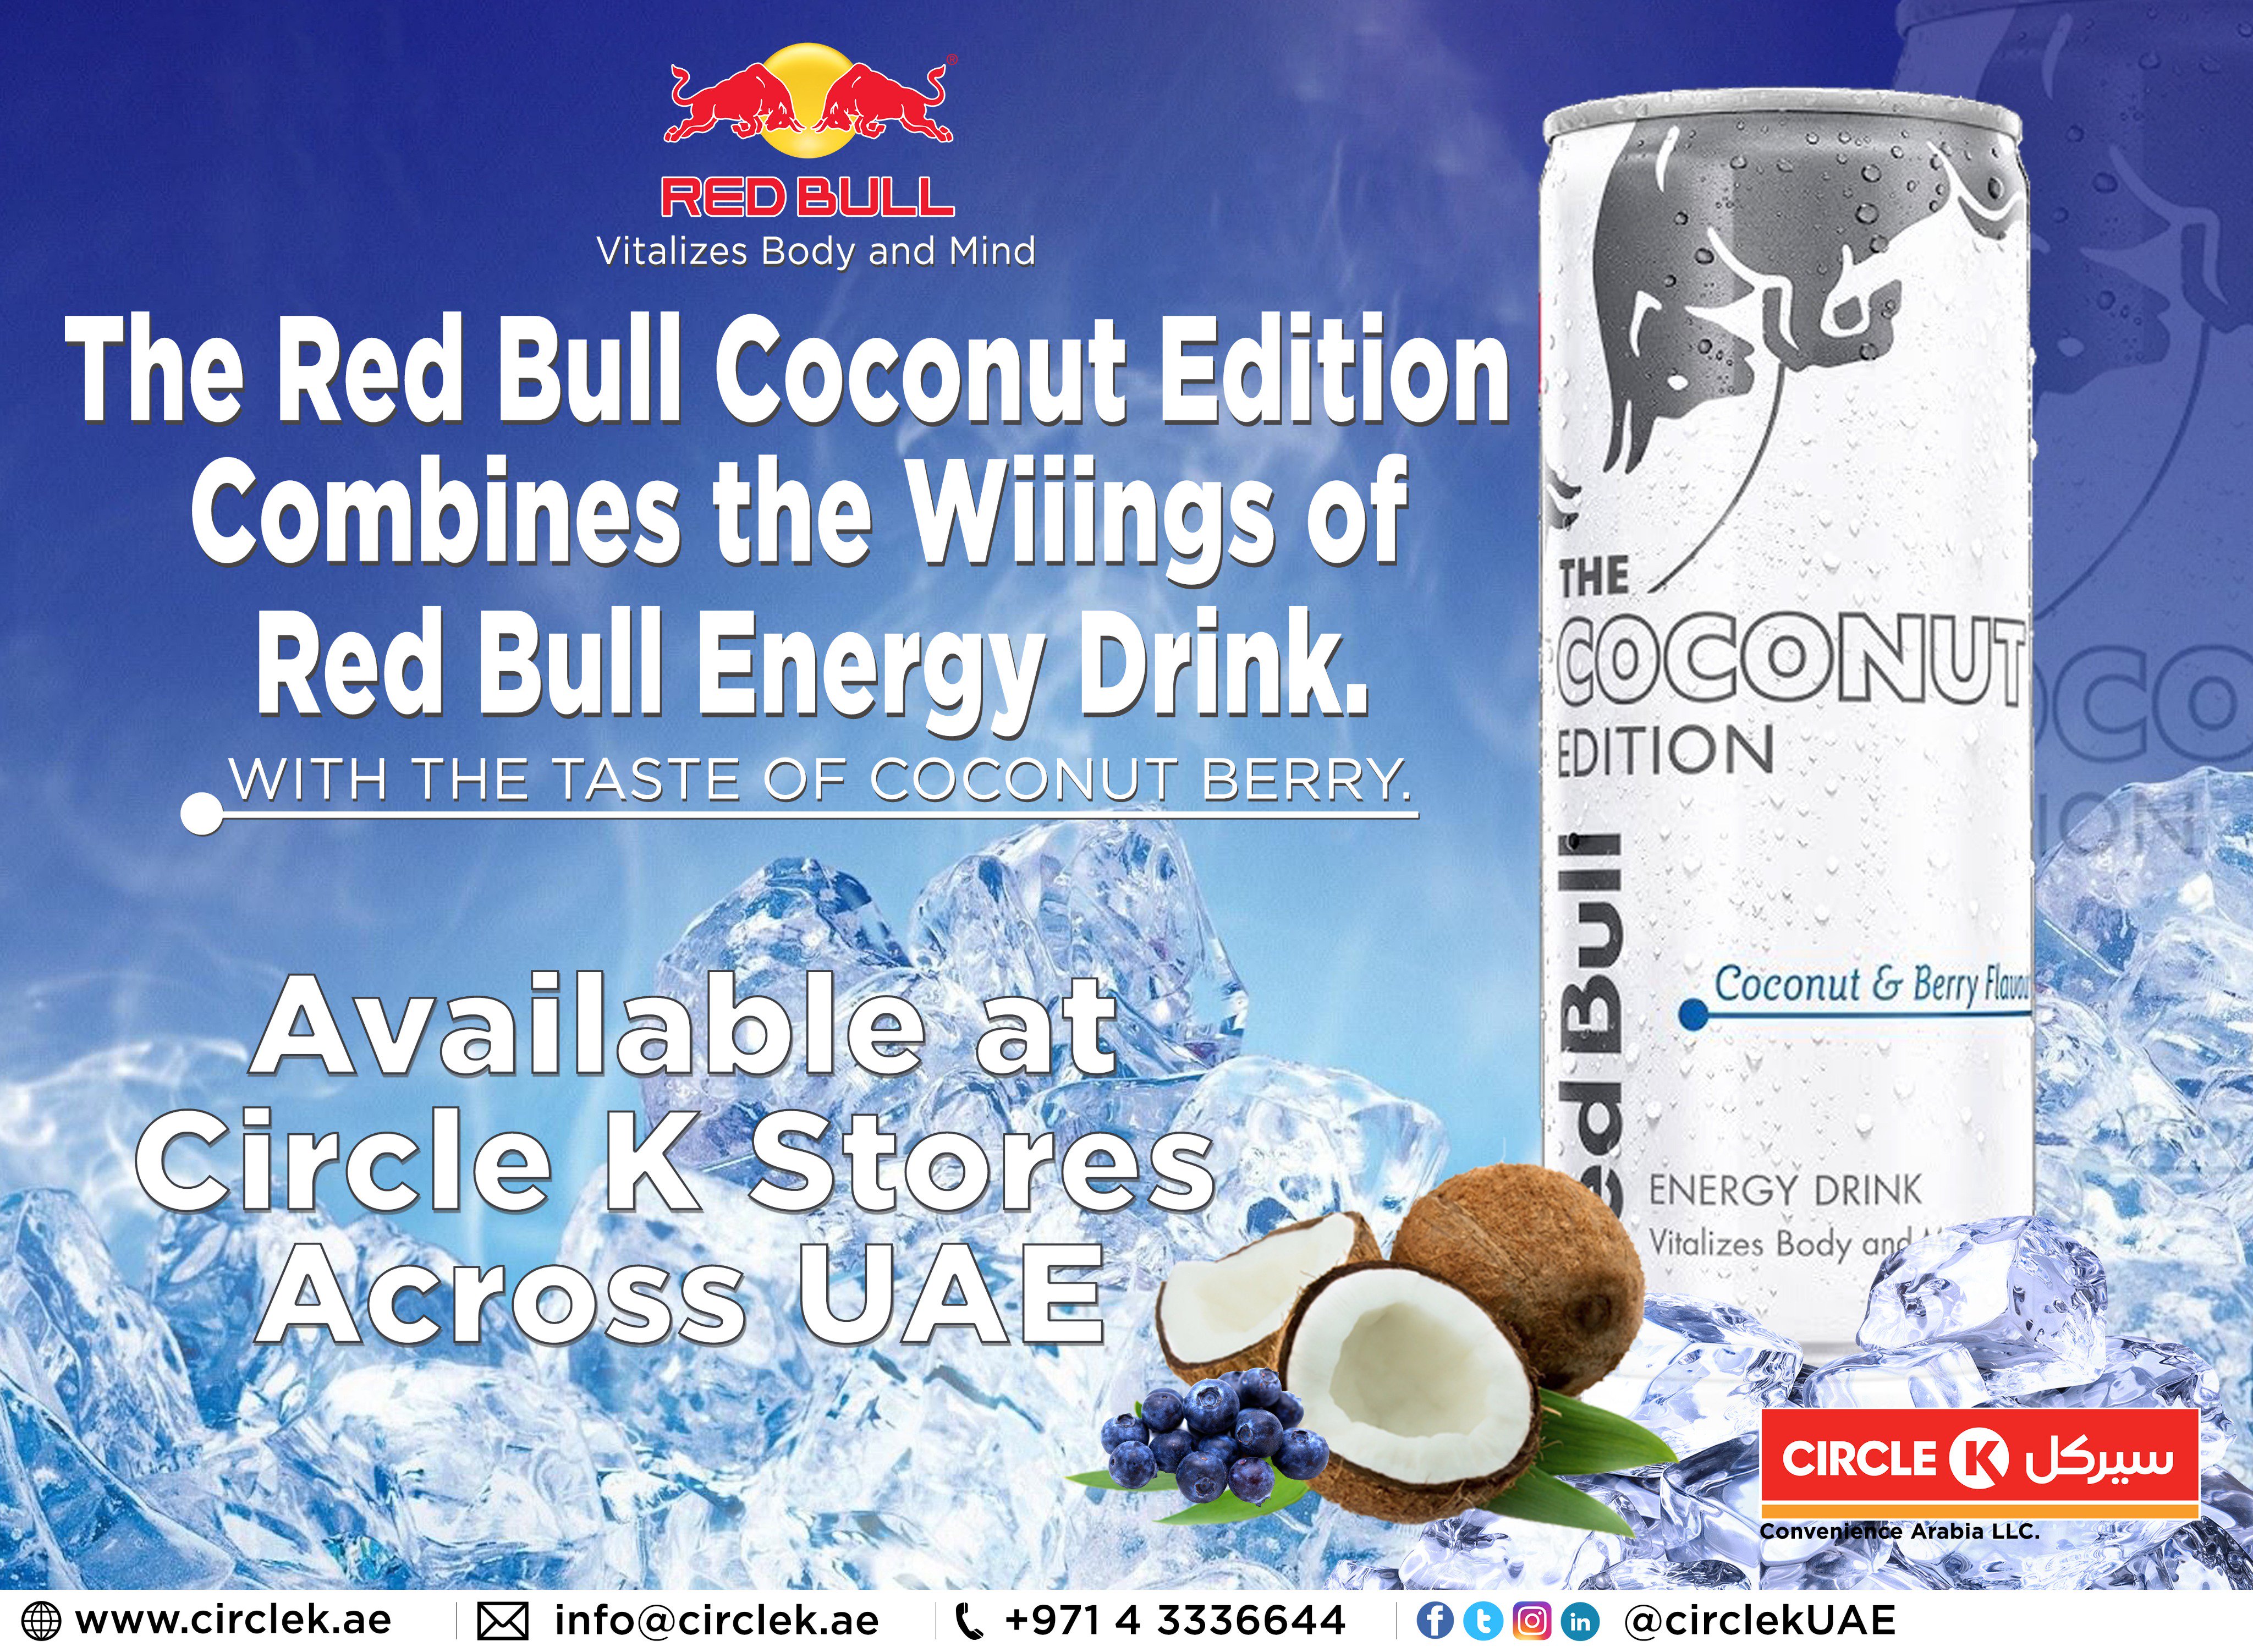 Twitter-এ Circlek UAE: "Red Bull ! Same Benefit - Different taste !!! Grab your new Red Bull Coconut edition combines the functionality Red Bull energy drink with a Coconut &amp; Berry